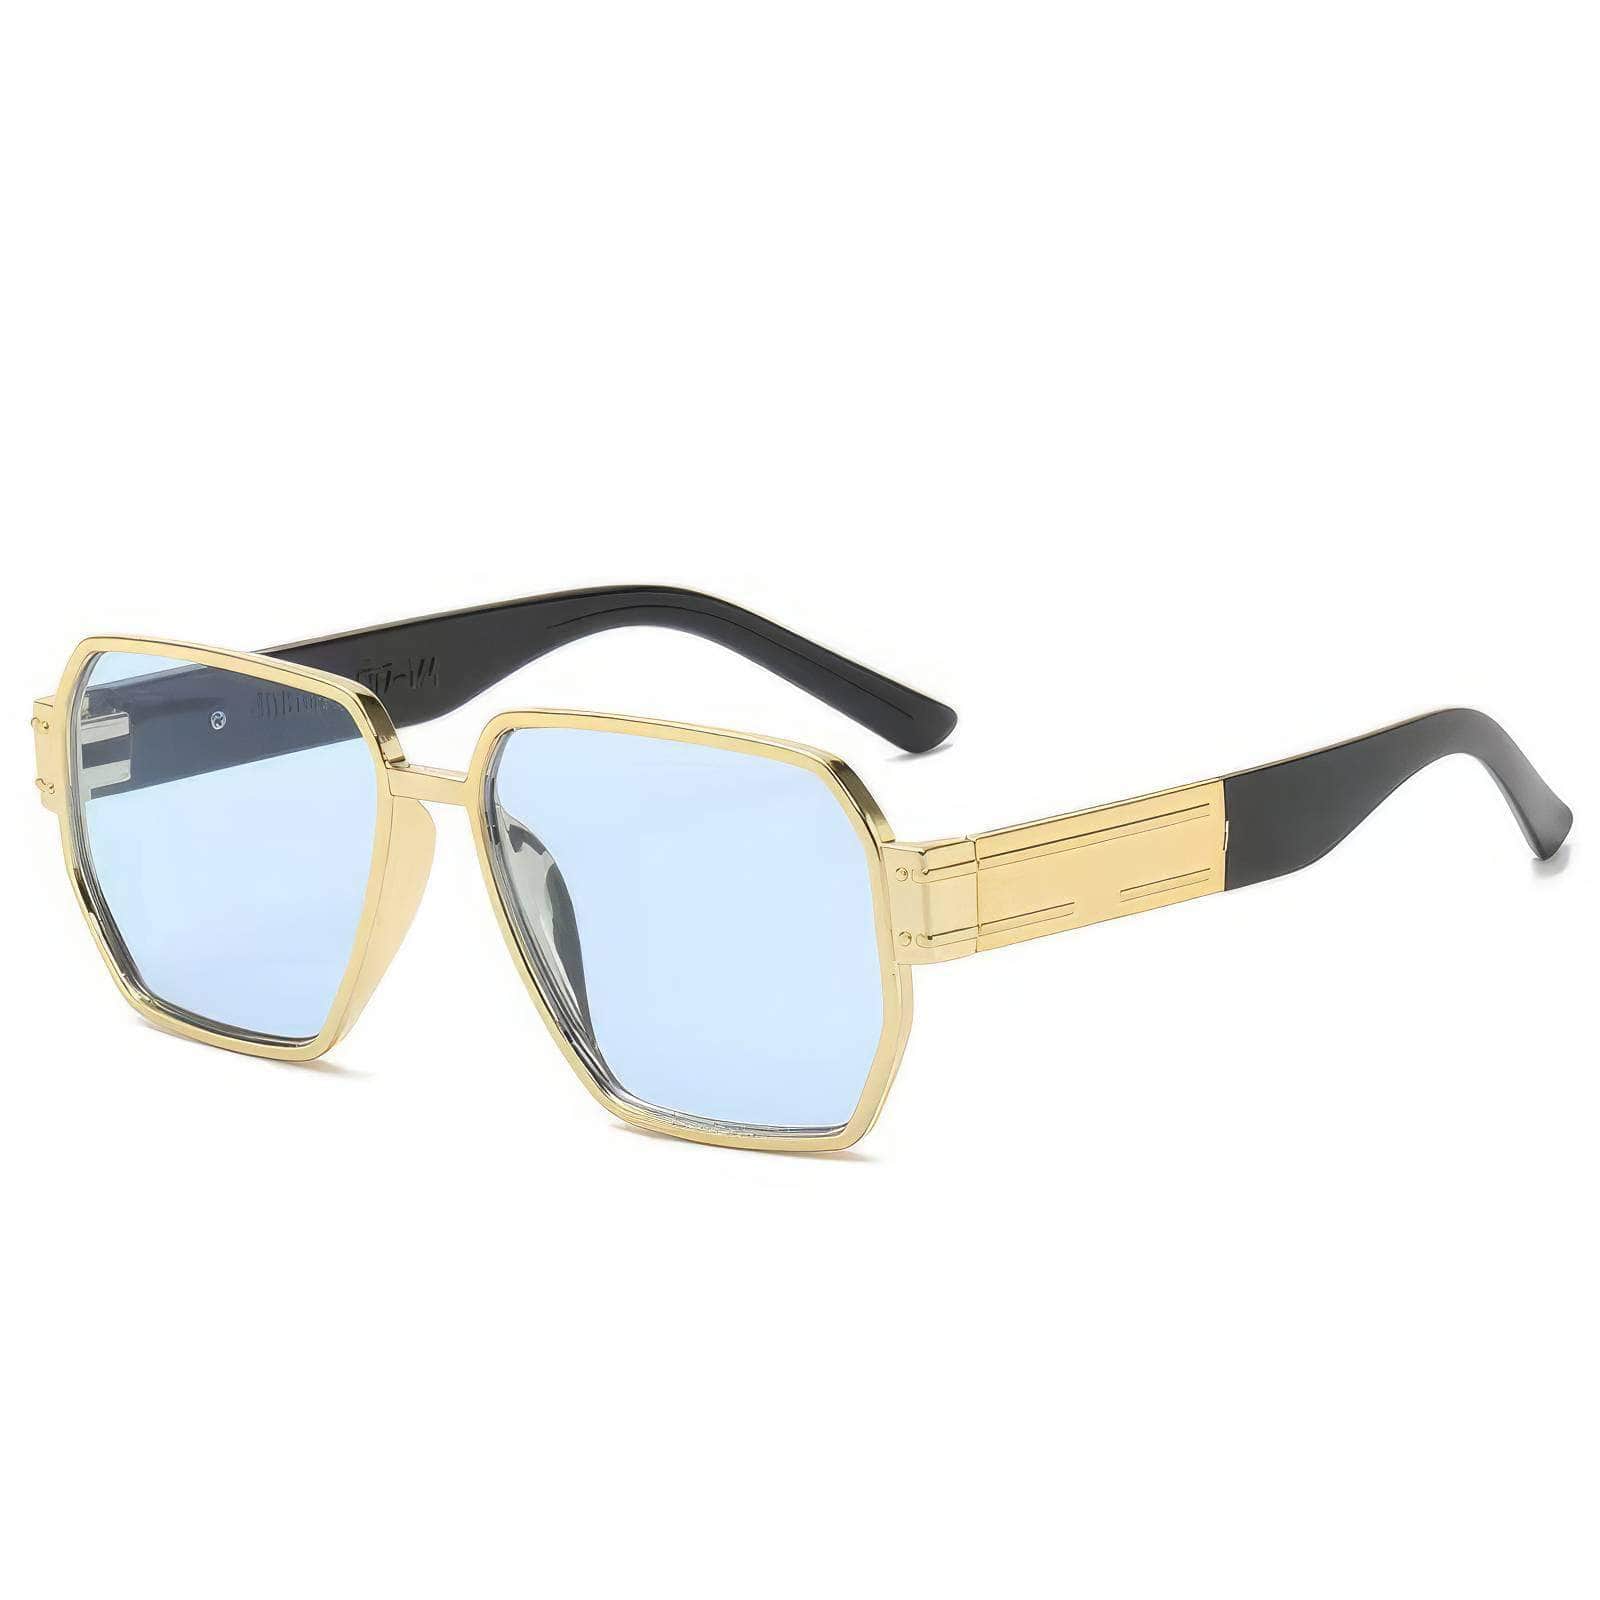 Simple Square Oversized Sunglasses Blue/Gold / Resin